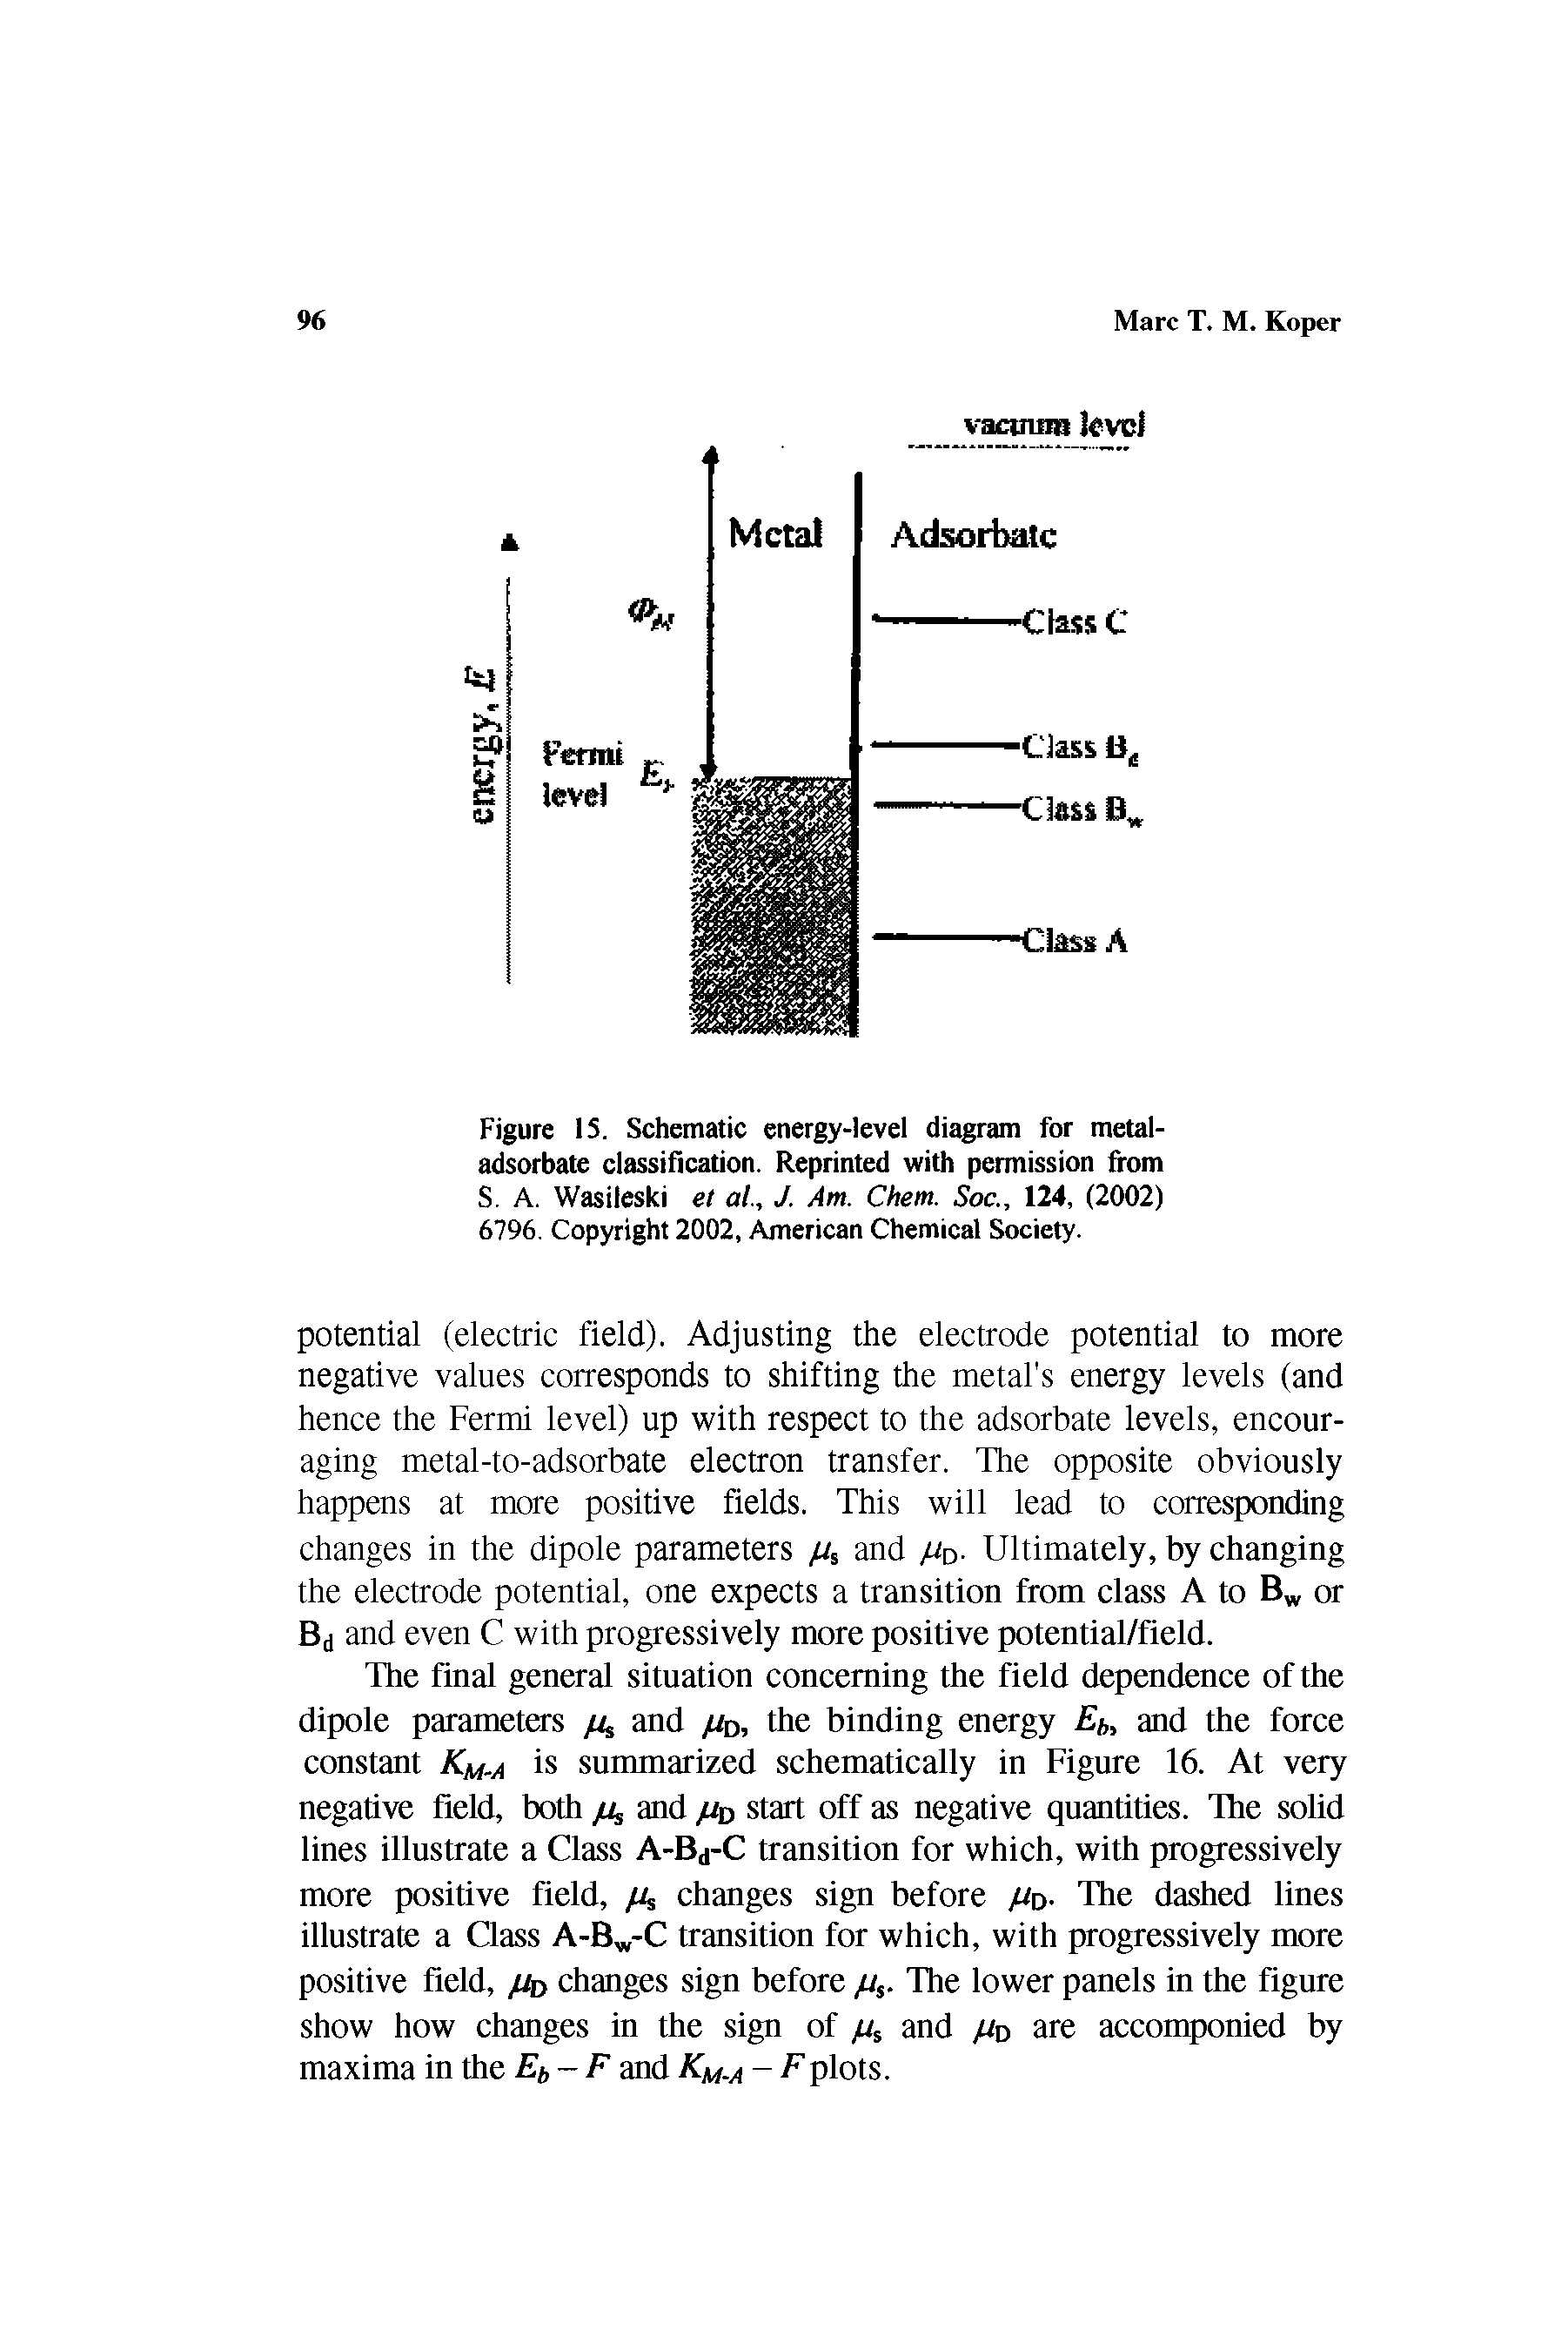 Figure 15. Schematic energy-level diagram for metal-adsorbate classification. Reprinted with permission from S. A. Wasileski et al., J. Am. Chem. Soc., 124, (2002) 6796. Copyright 2002, American Chemical Society.